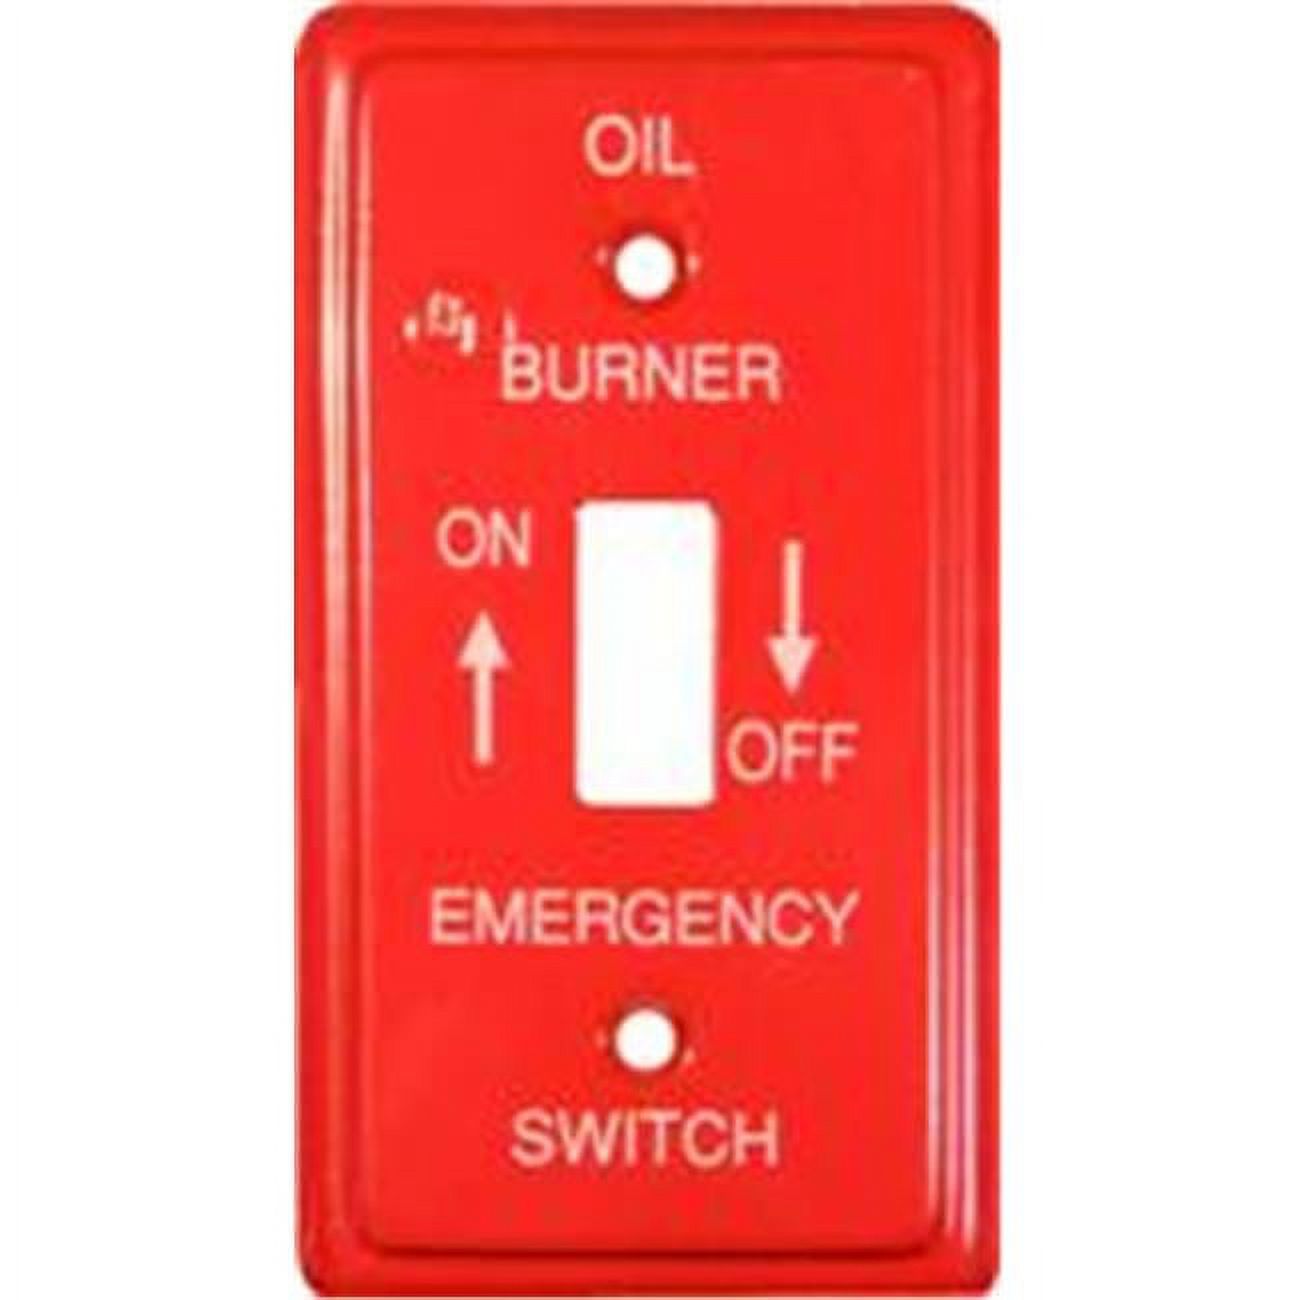 Morris Products 83490 Emergency Metal Switch Plates Utility Oil - image 1 of 3